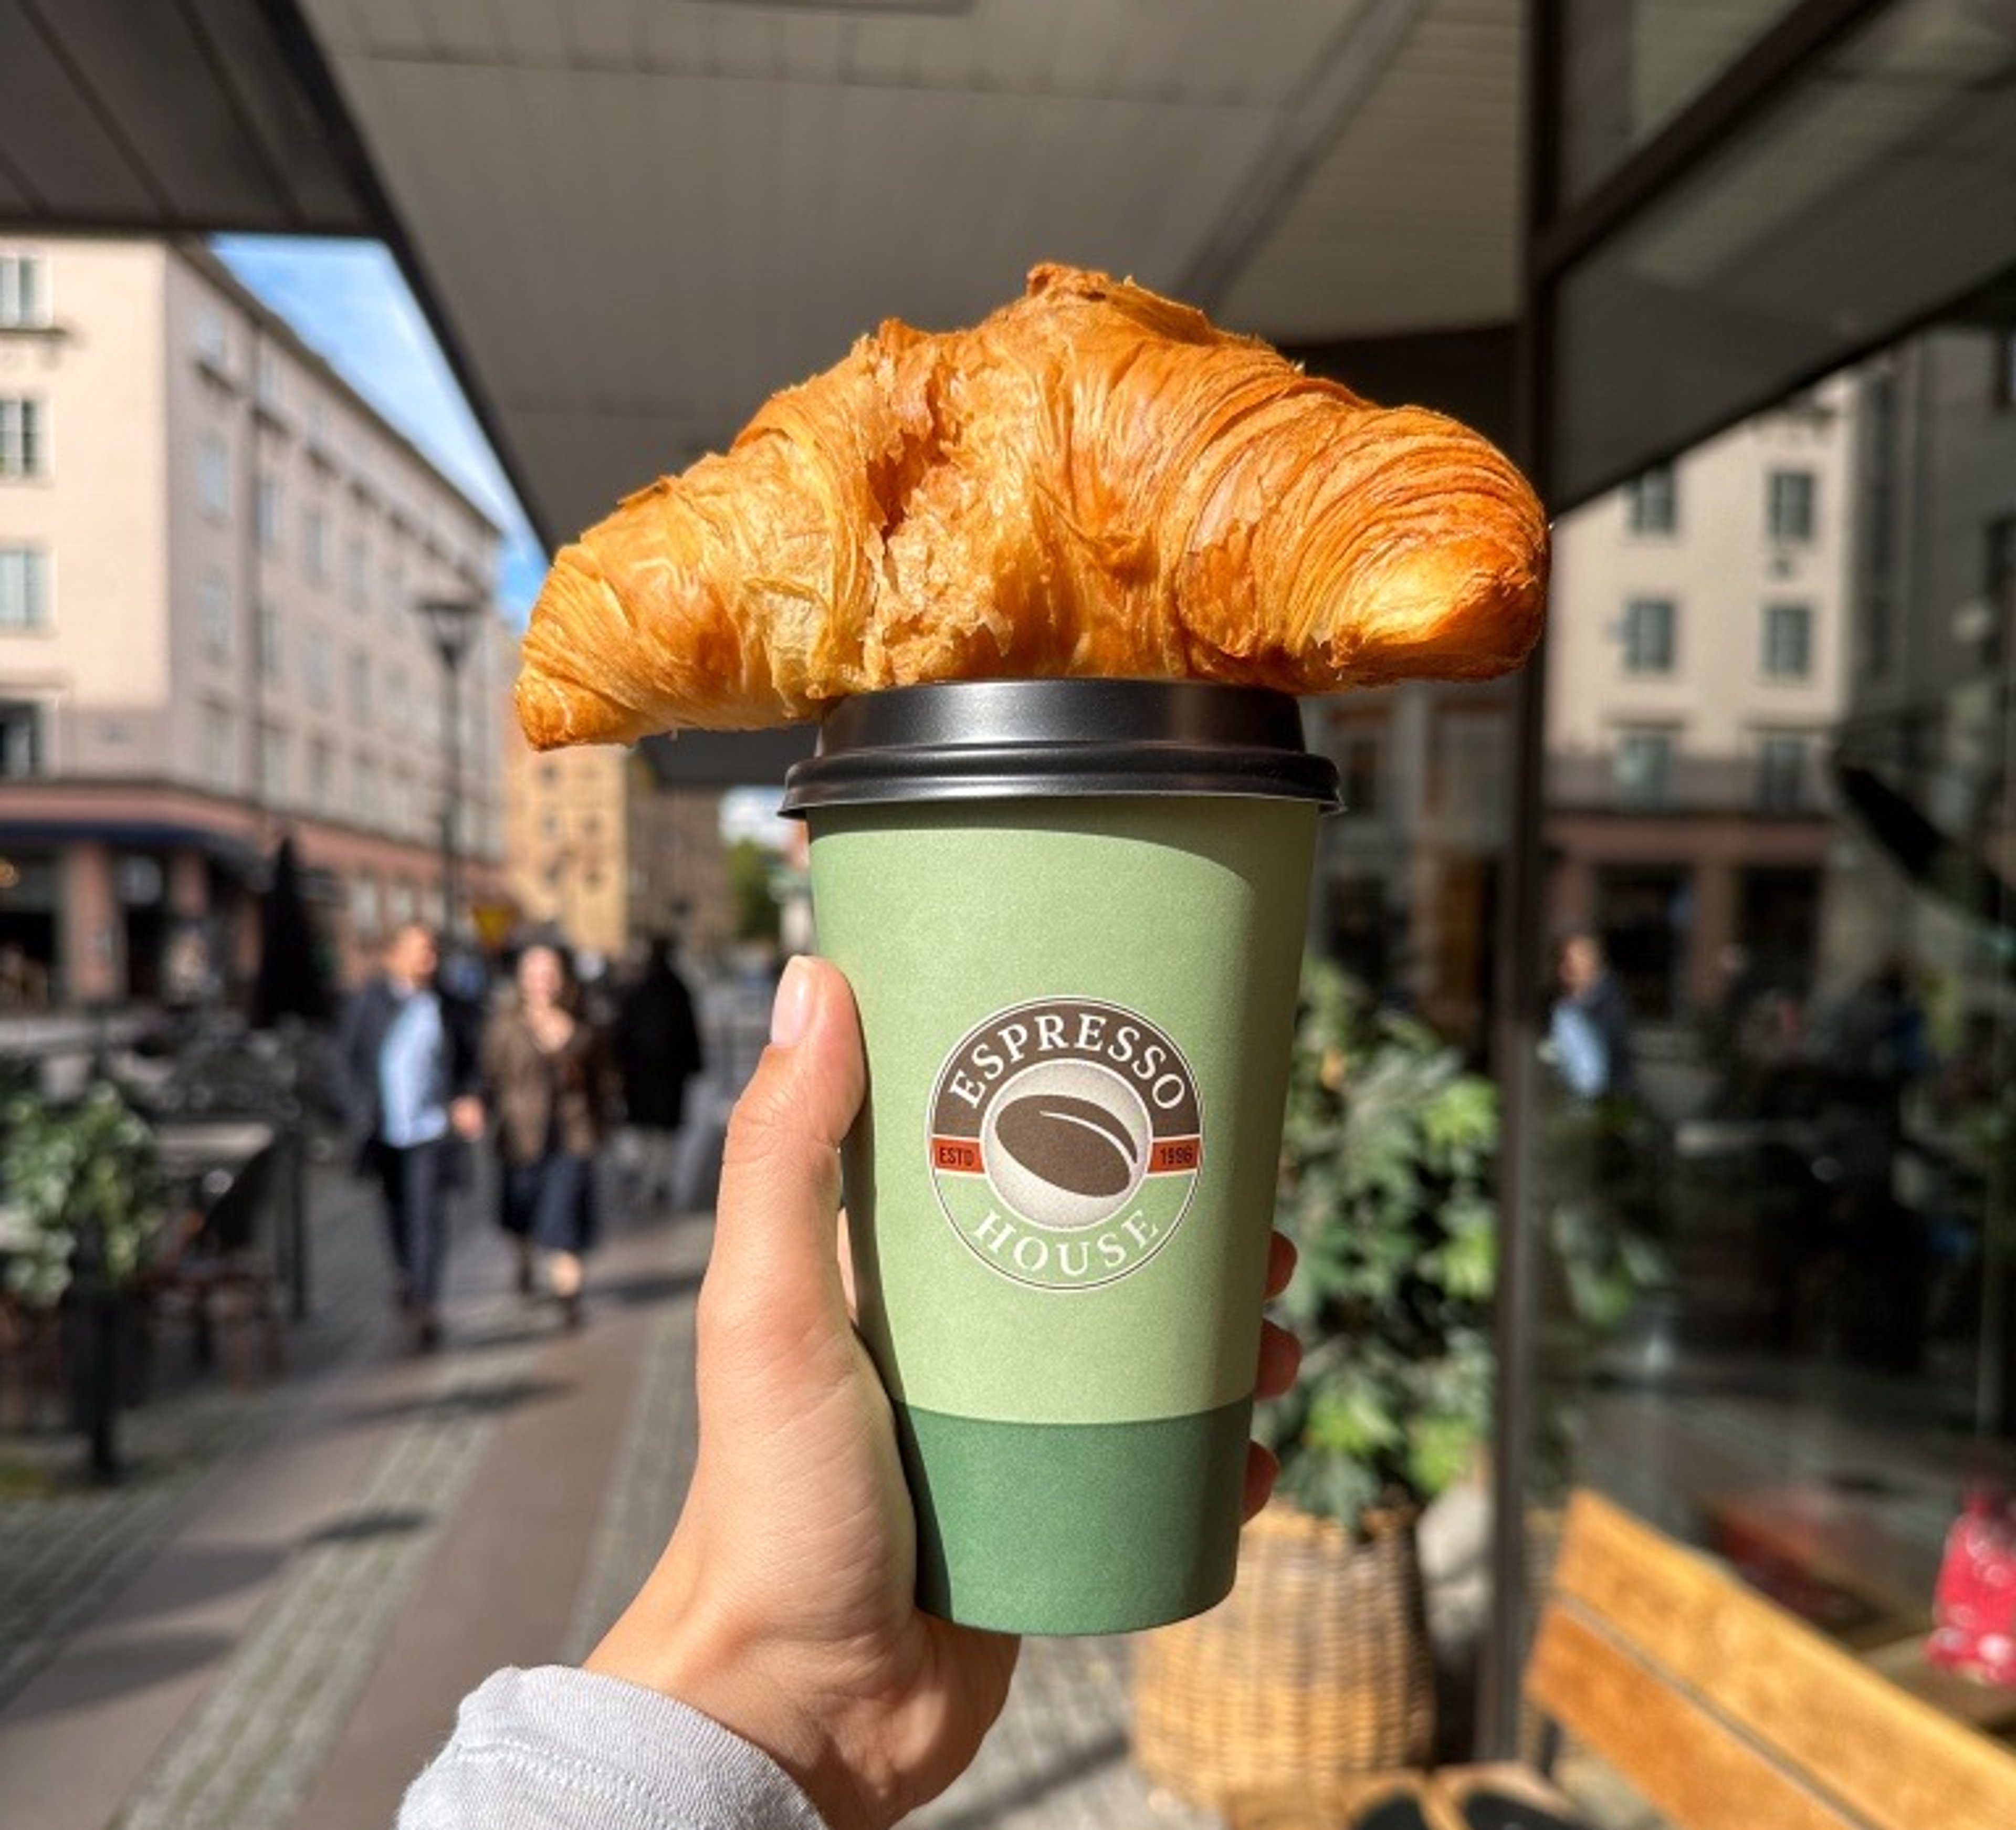 Your favorite croissant and fresh brewed coffee